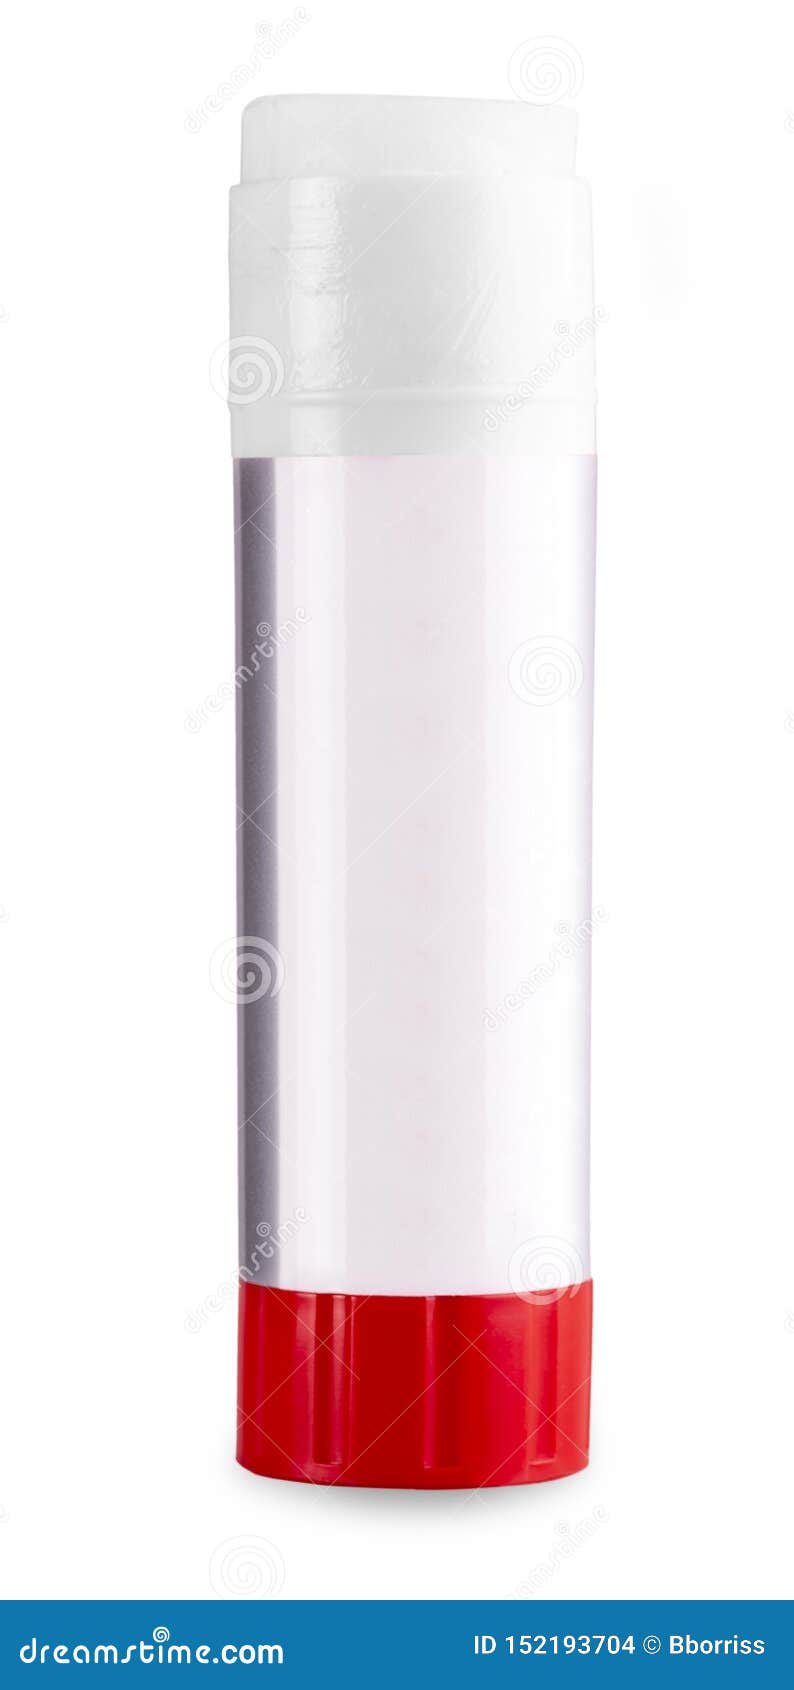 The Opened Paper Glue Stick Isolated on White Background Stock Photo -  Image of chemical, join: 152193704